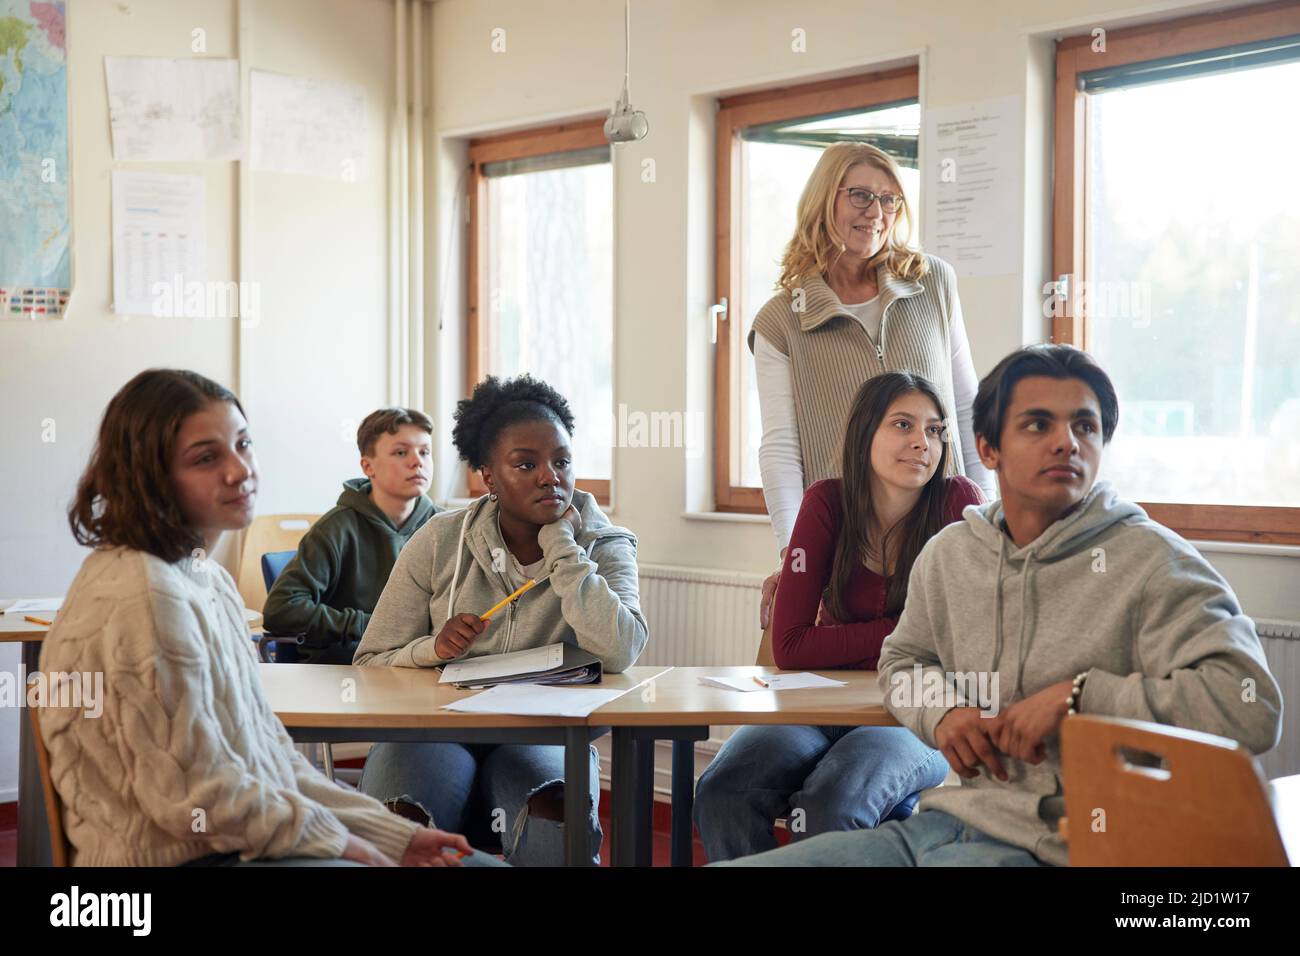 Group of students and teacher in class Stock Photo